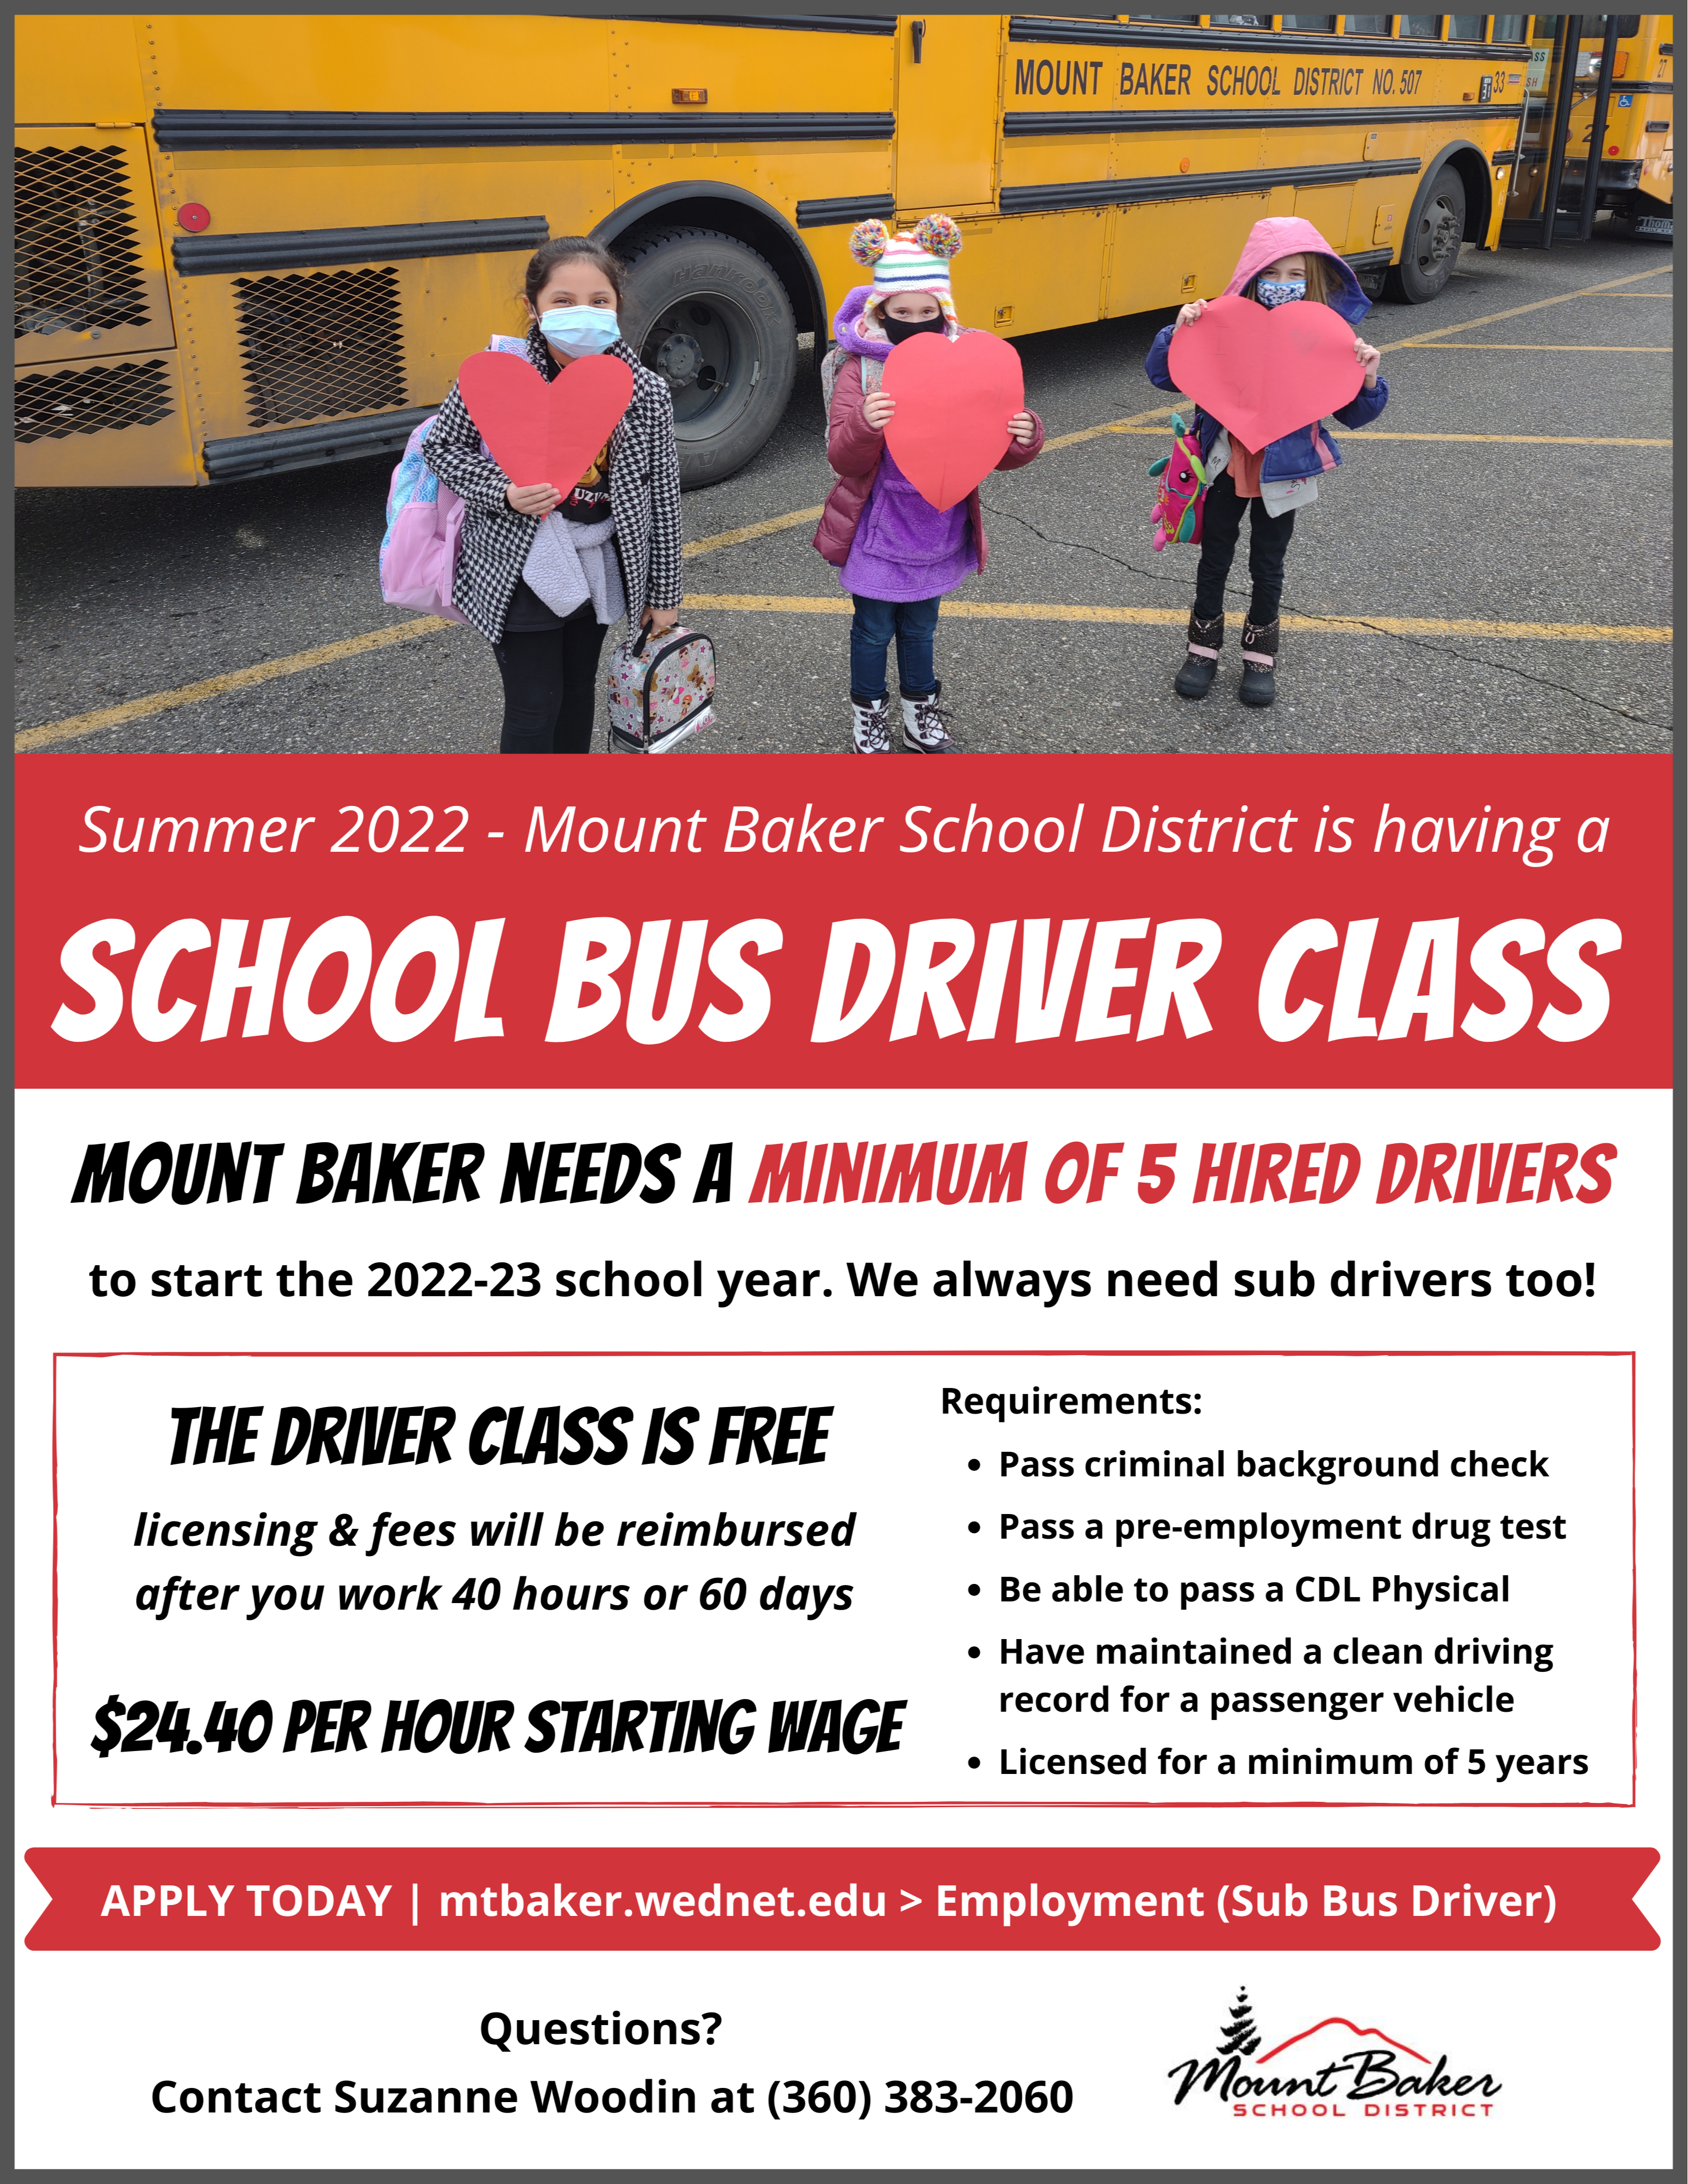 School Bus Driver Class in Summer 2022 Flyer, Students Holding Paper Hearts and Standing Next to a School Bus